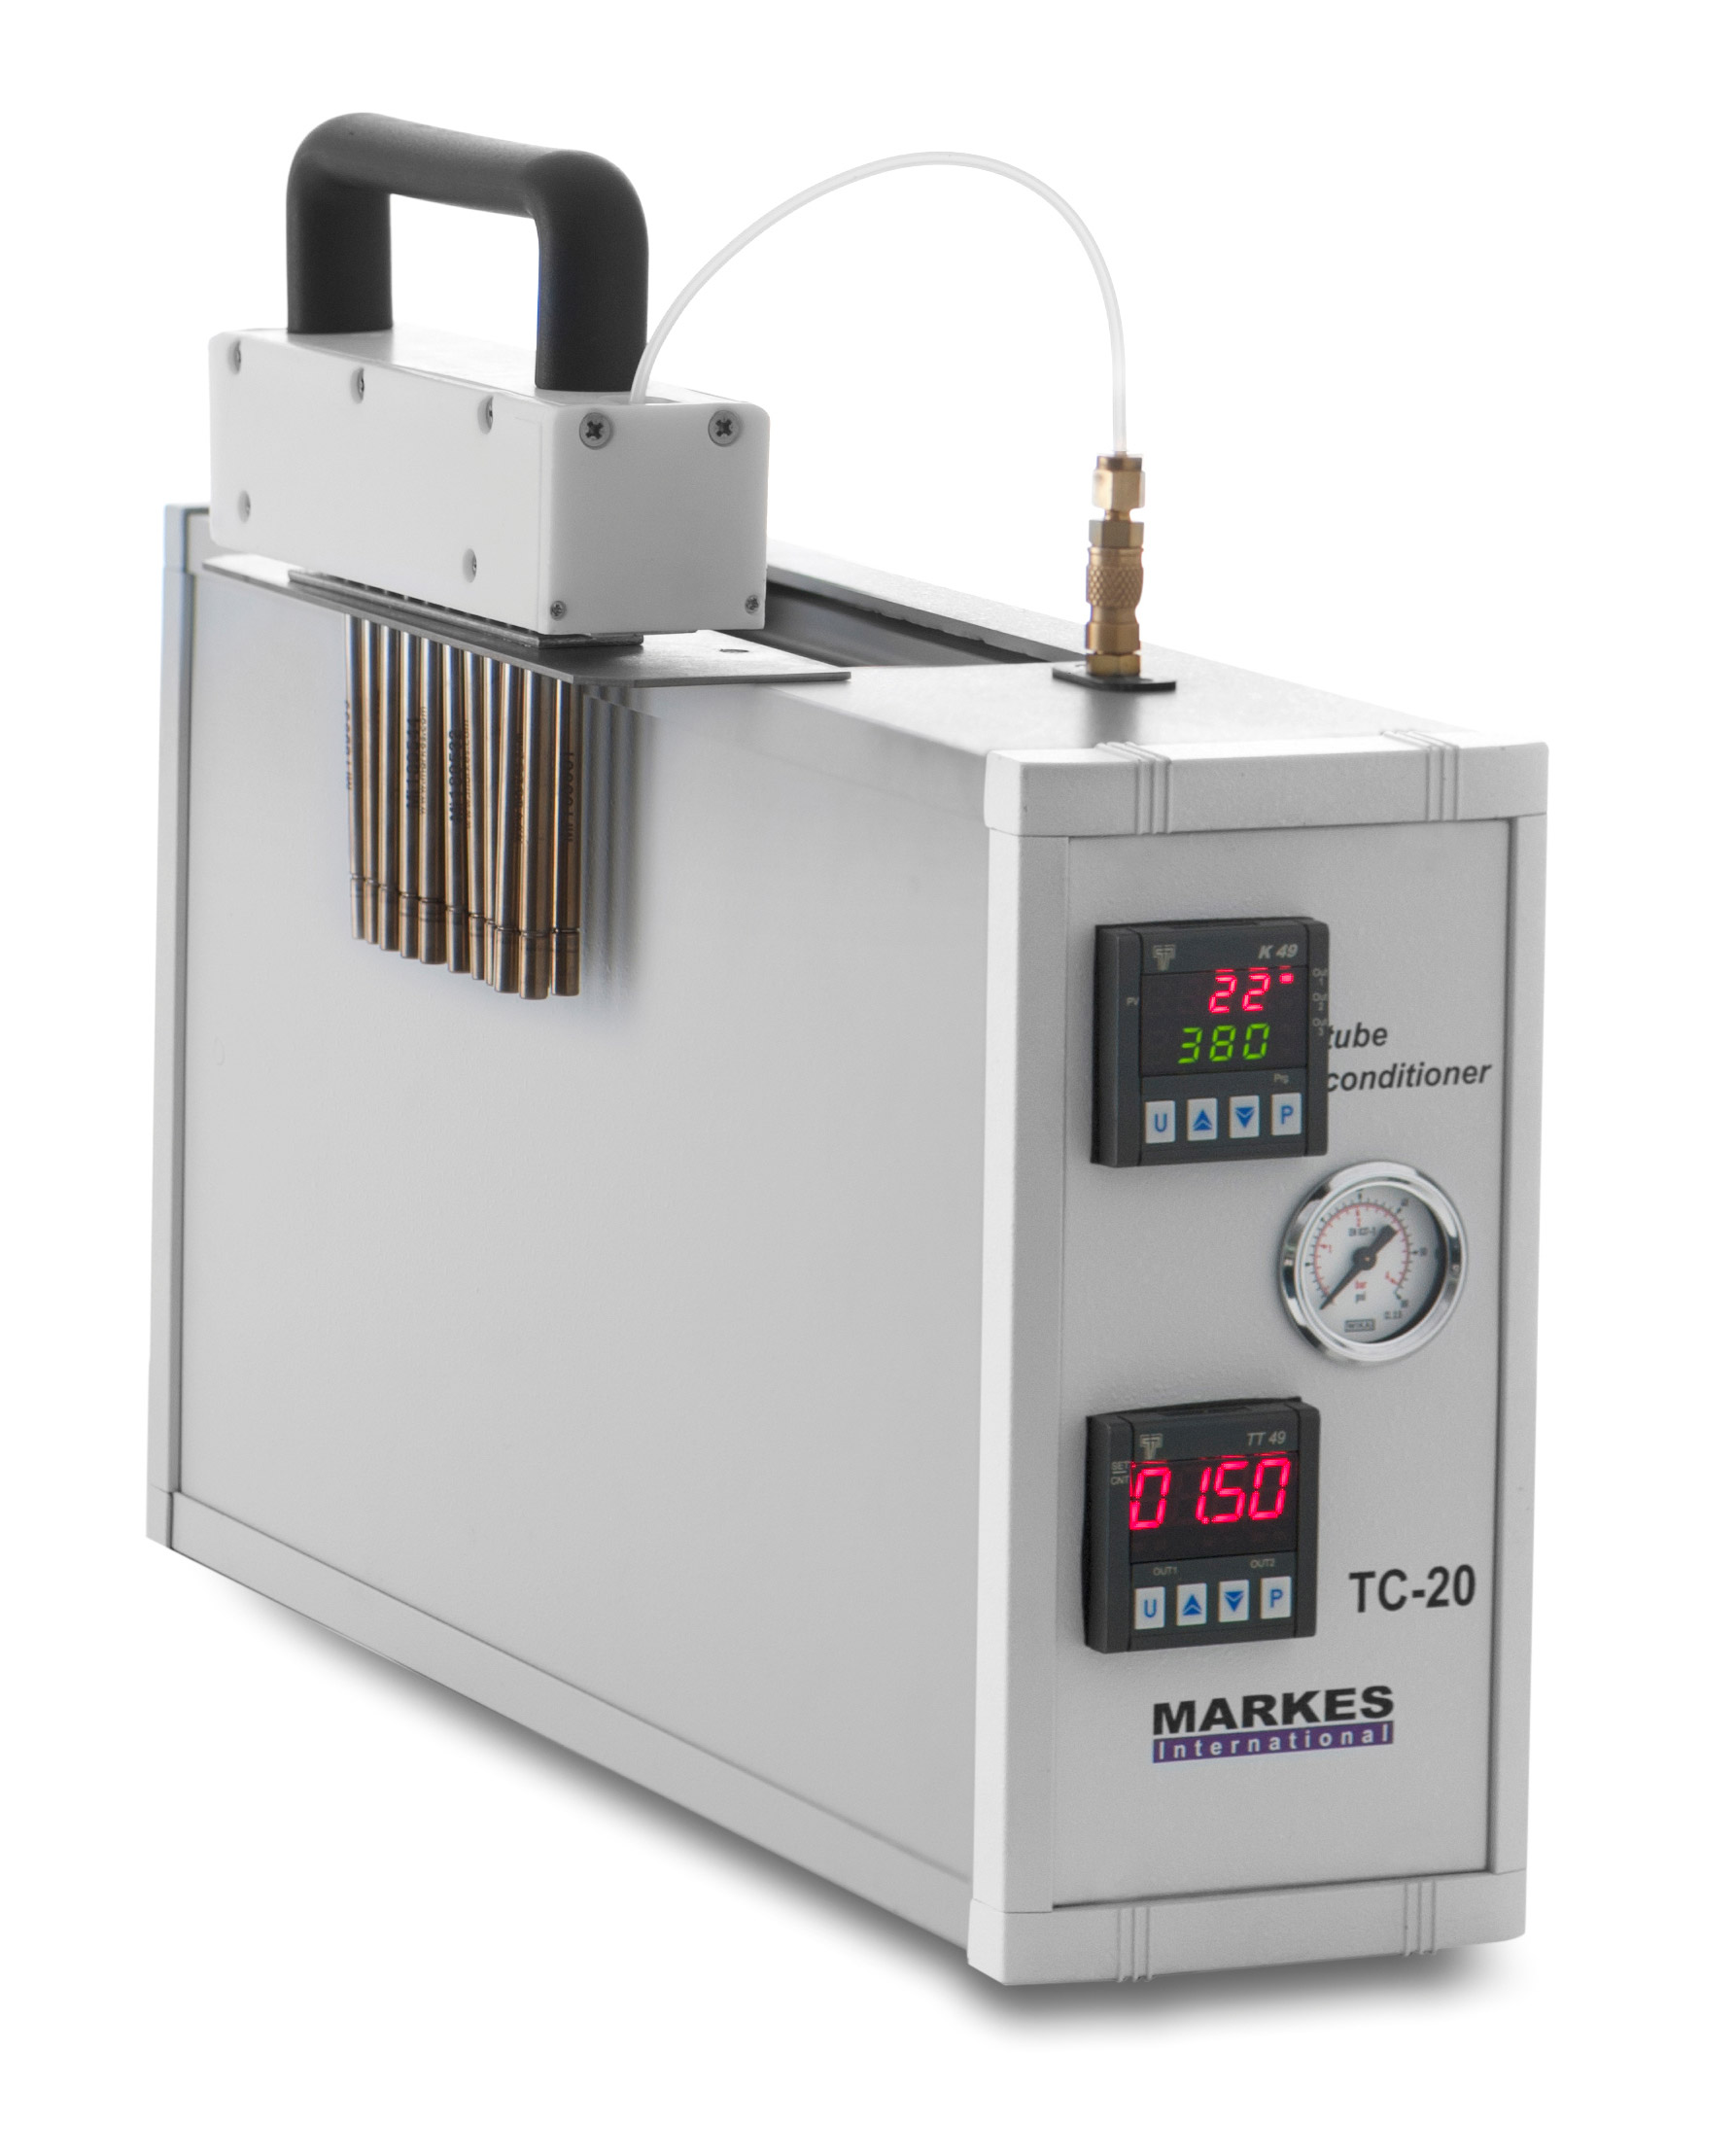 250oC M-CTE250TI 4 Chamber Markes International: Micro-Chamber/Thermal Extractor Inert with 4 Toggle Valves